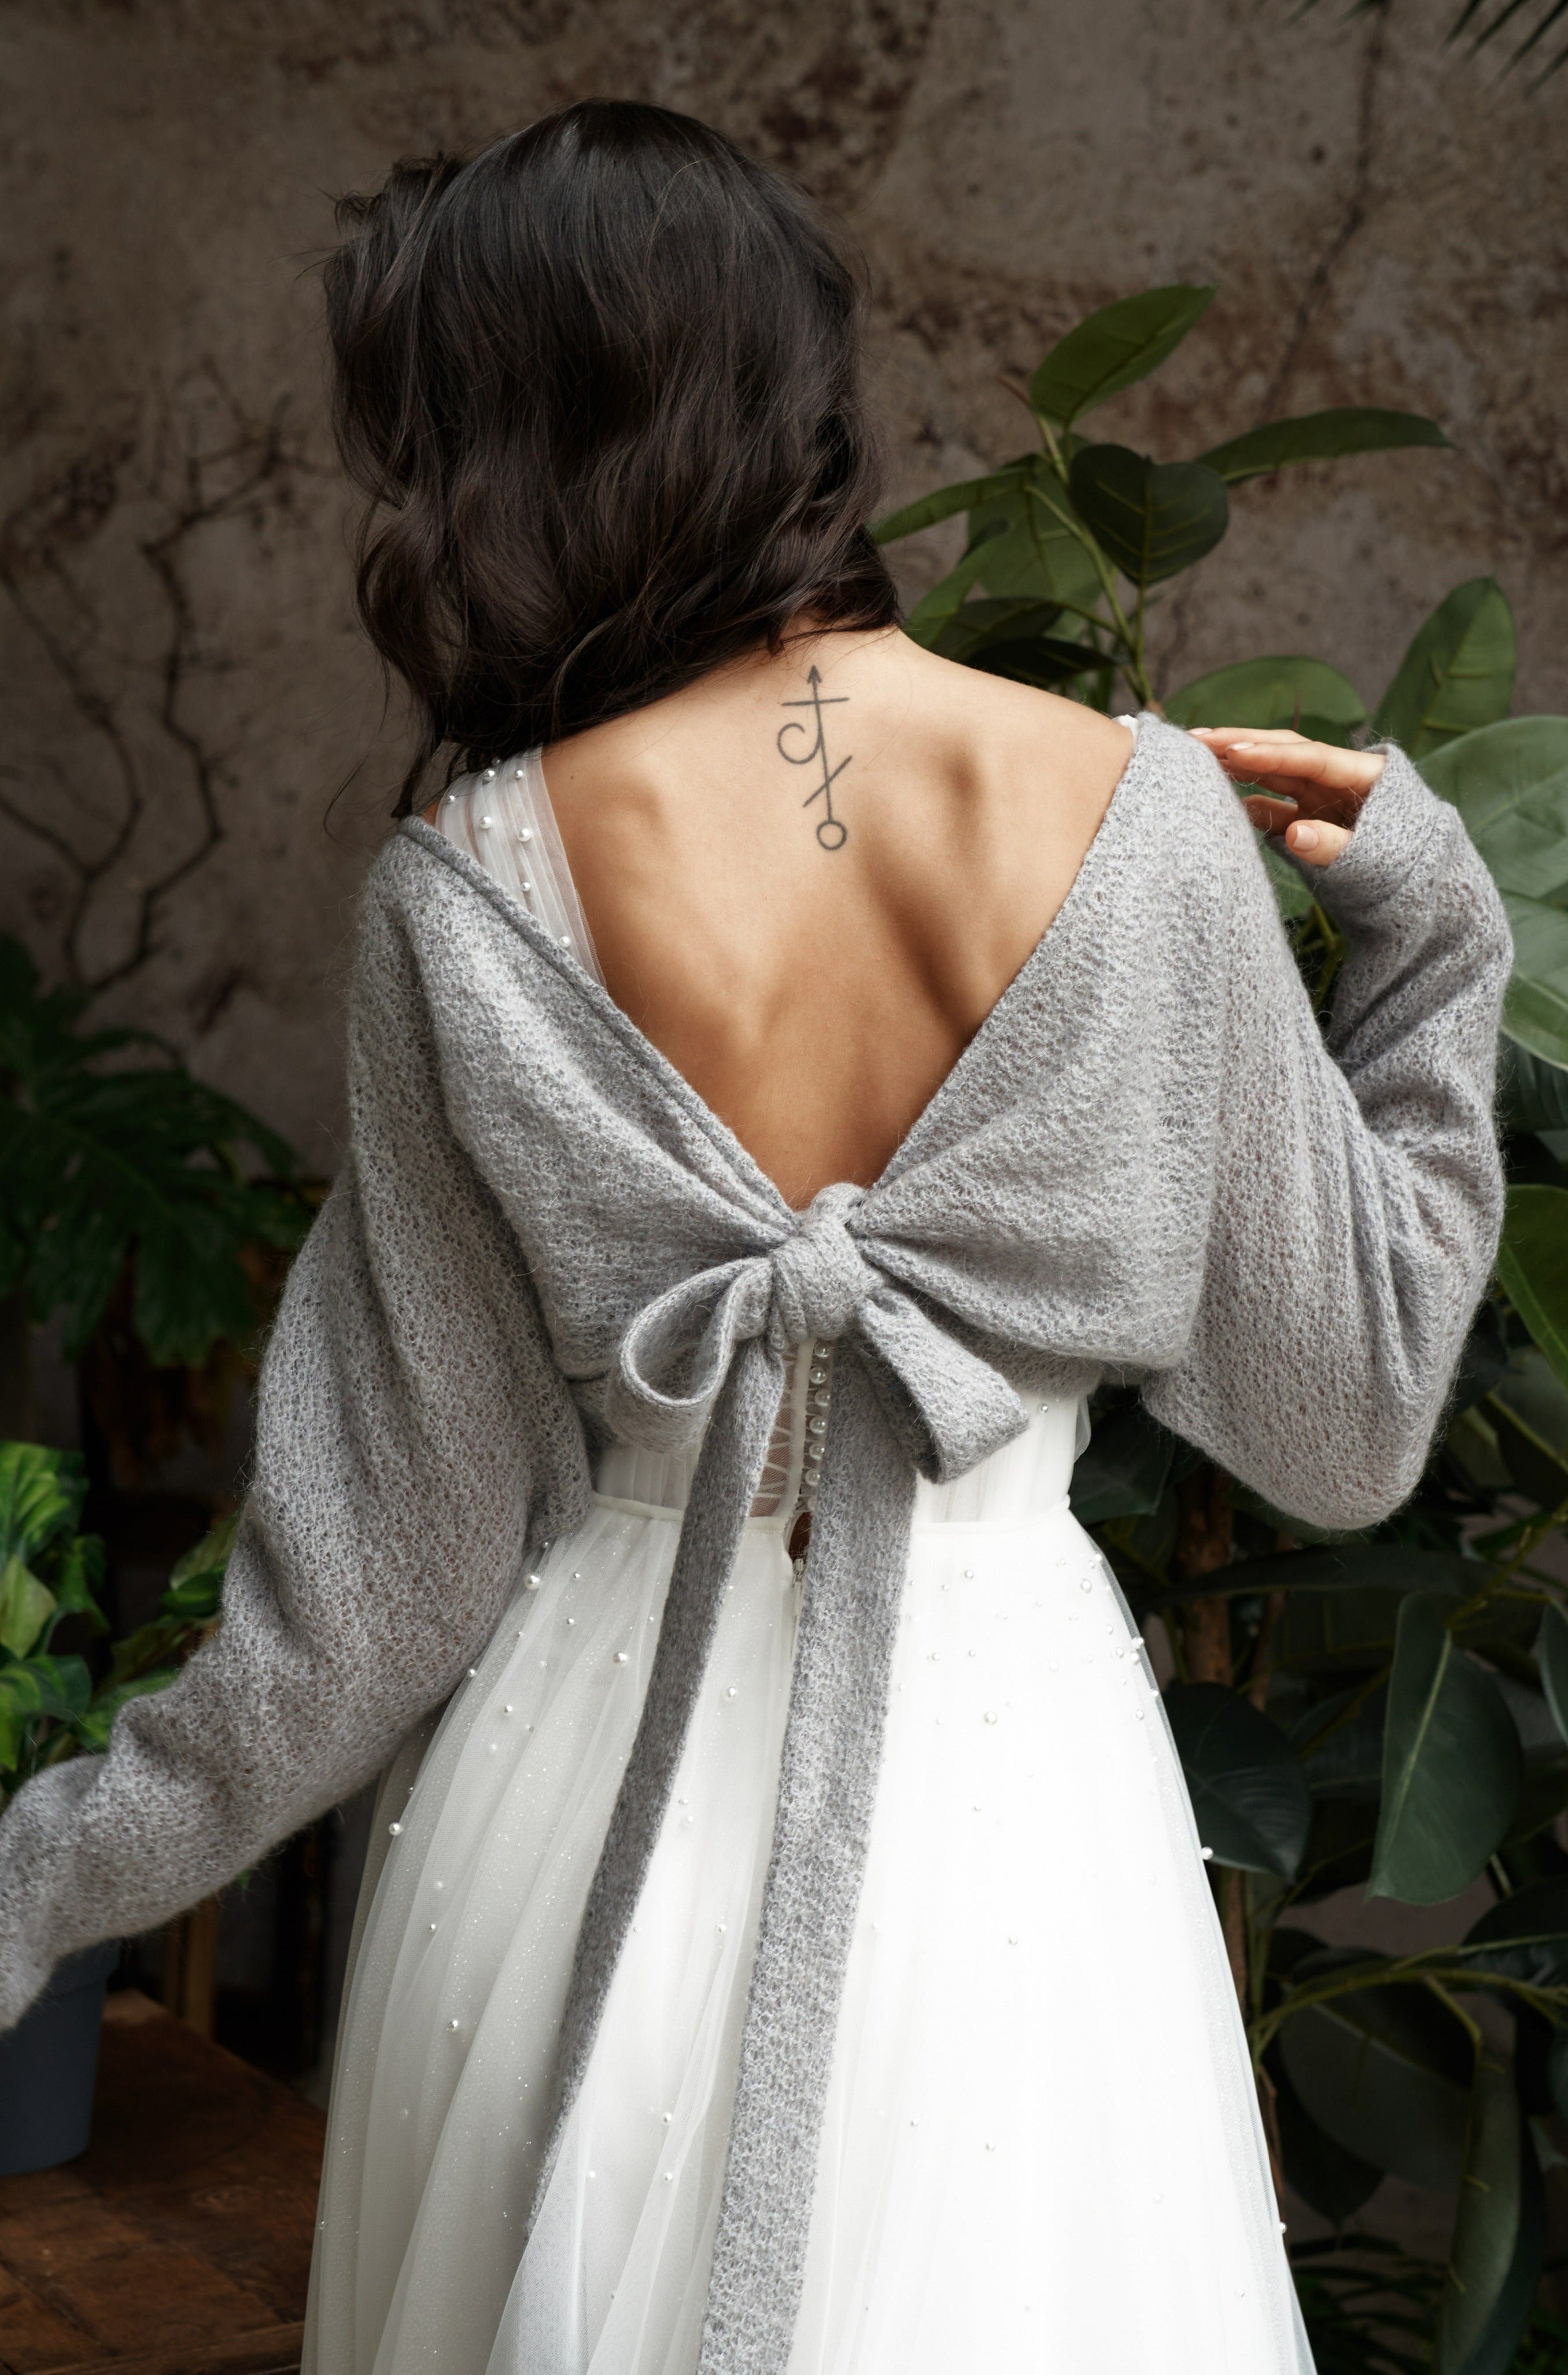 Bridal cardigan for wedding dress. Wool wedding sweater with ties in grey color.